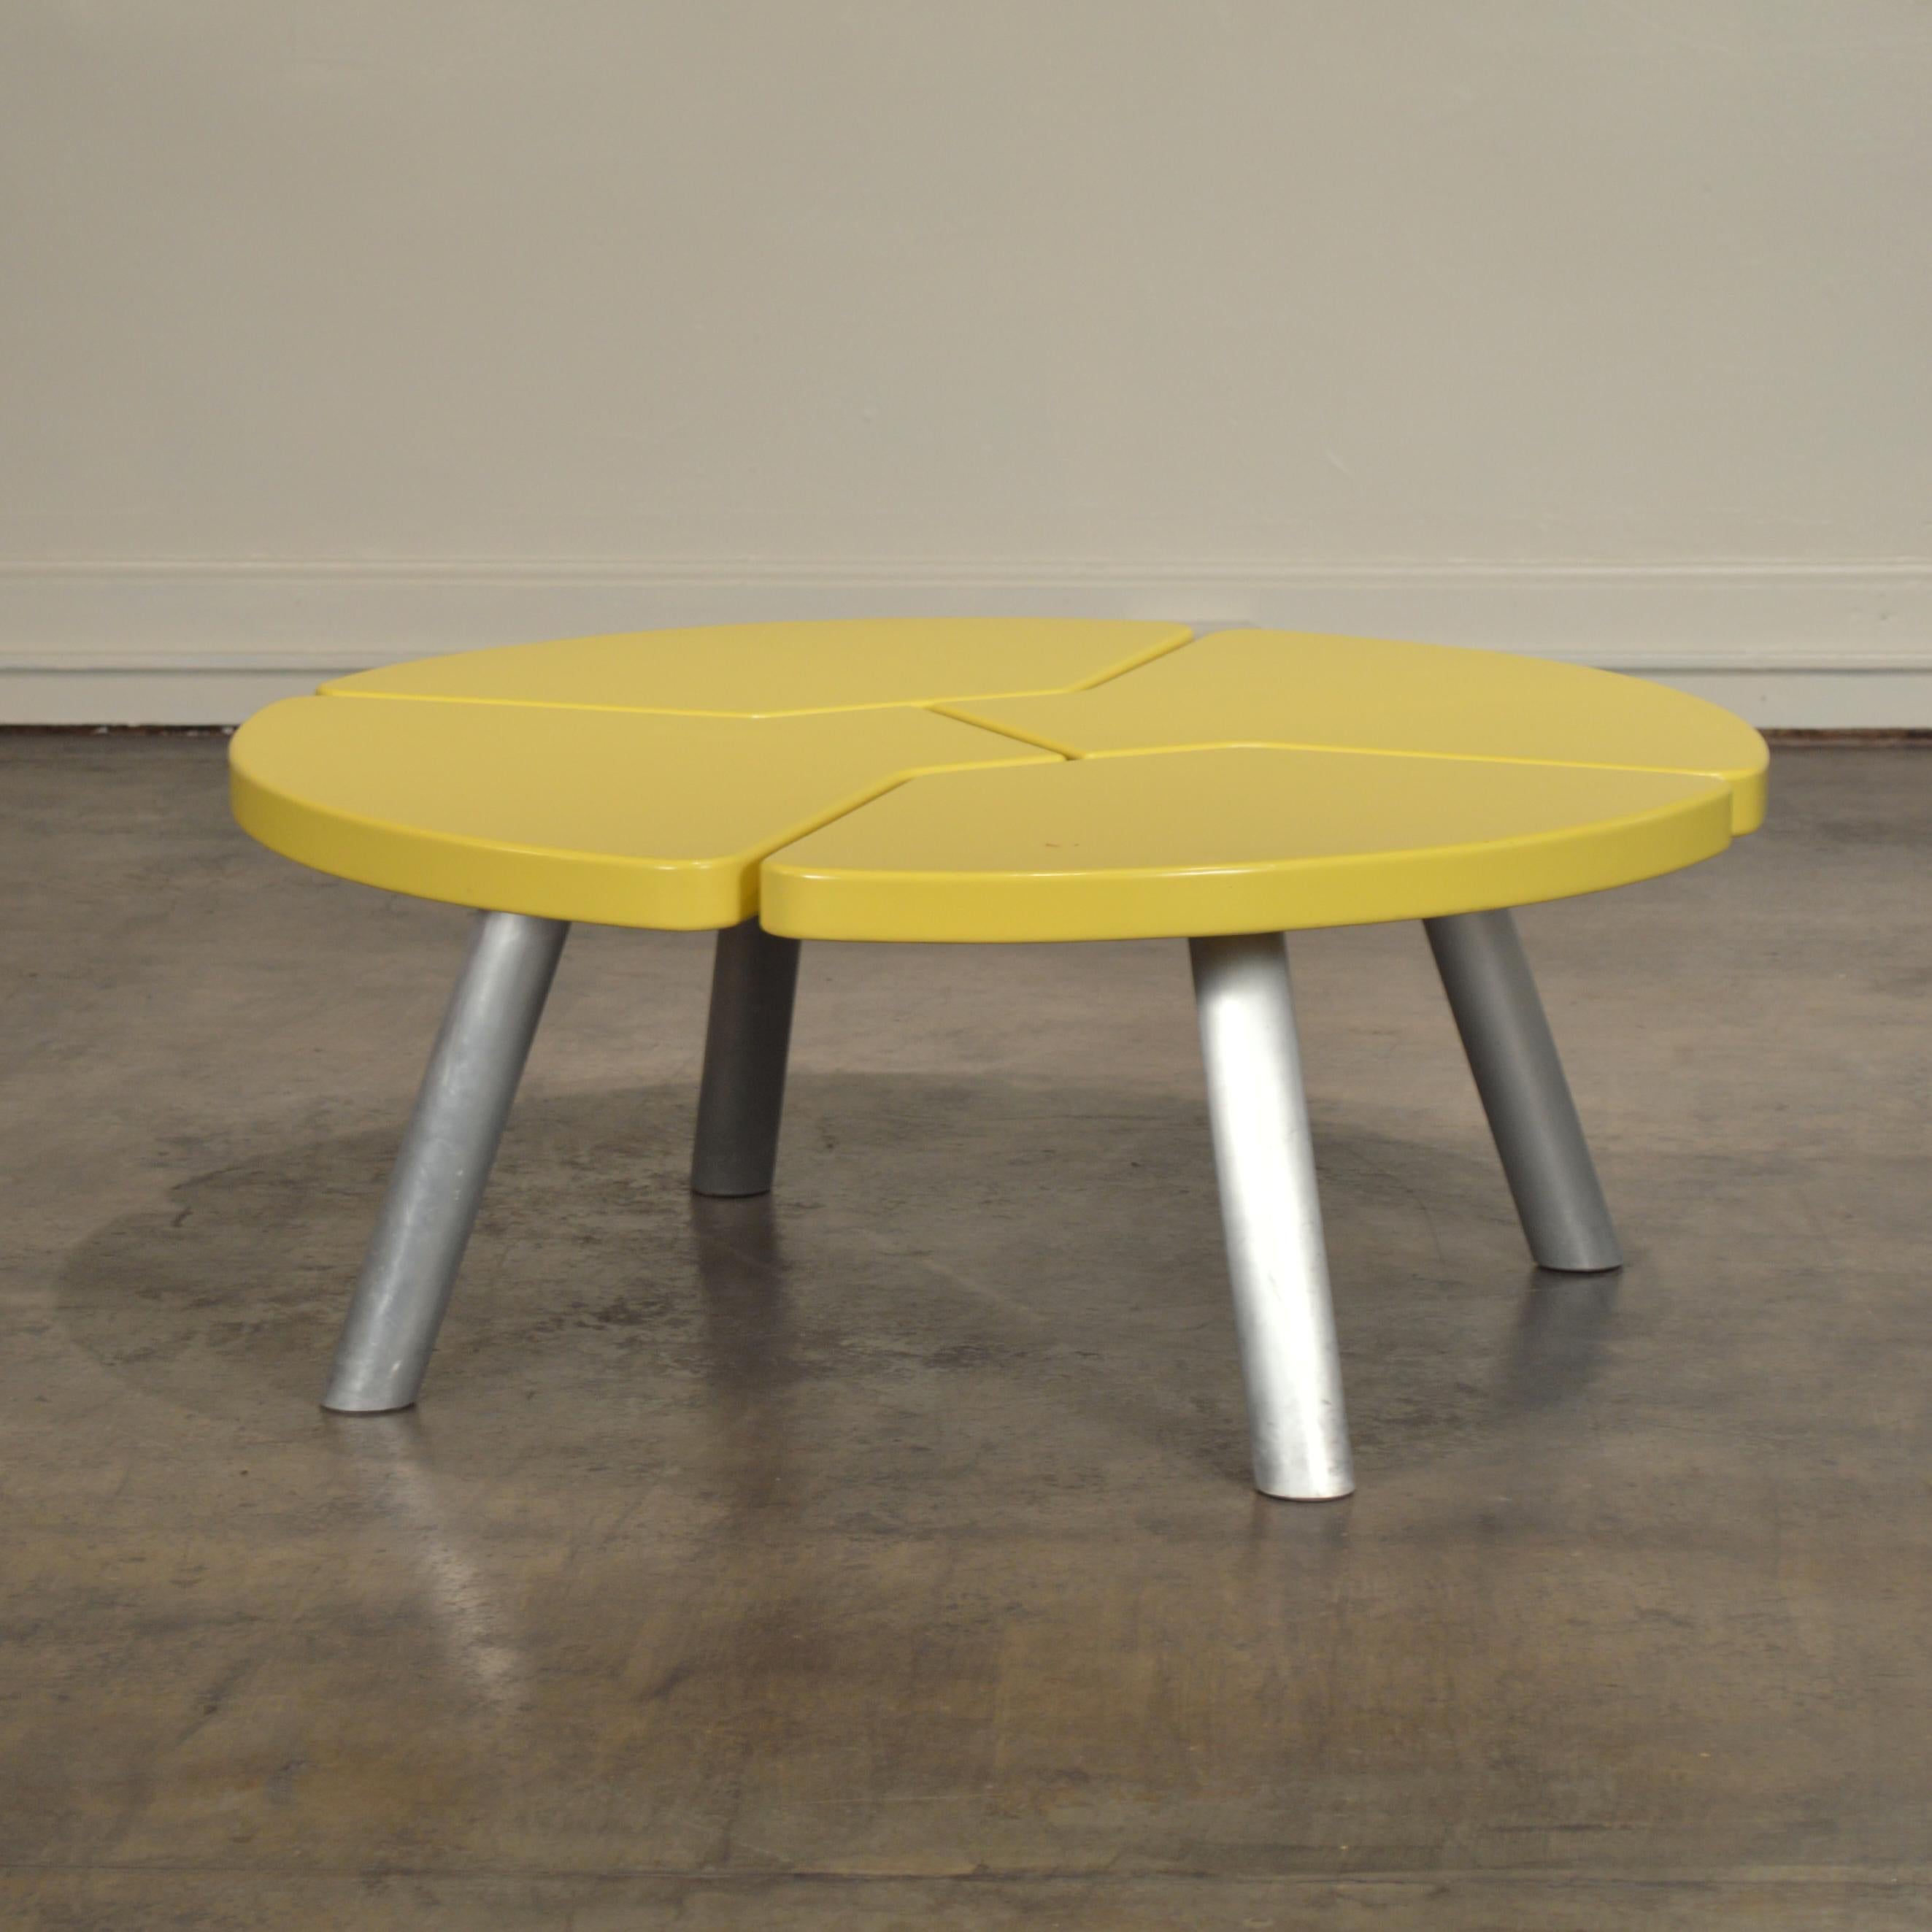 Painted Angela Adams Mod Pod Coffee Table in Chartreuse For Sale